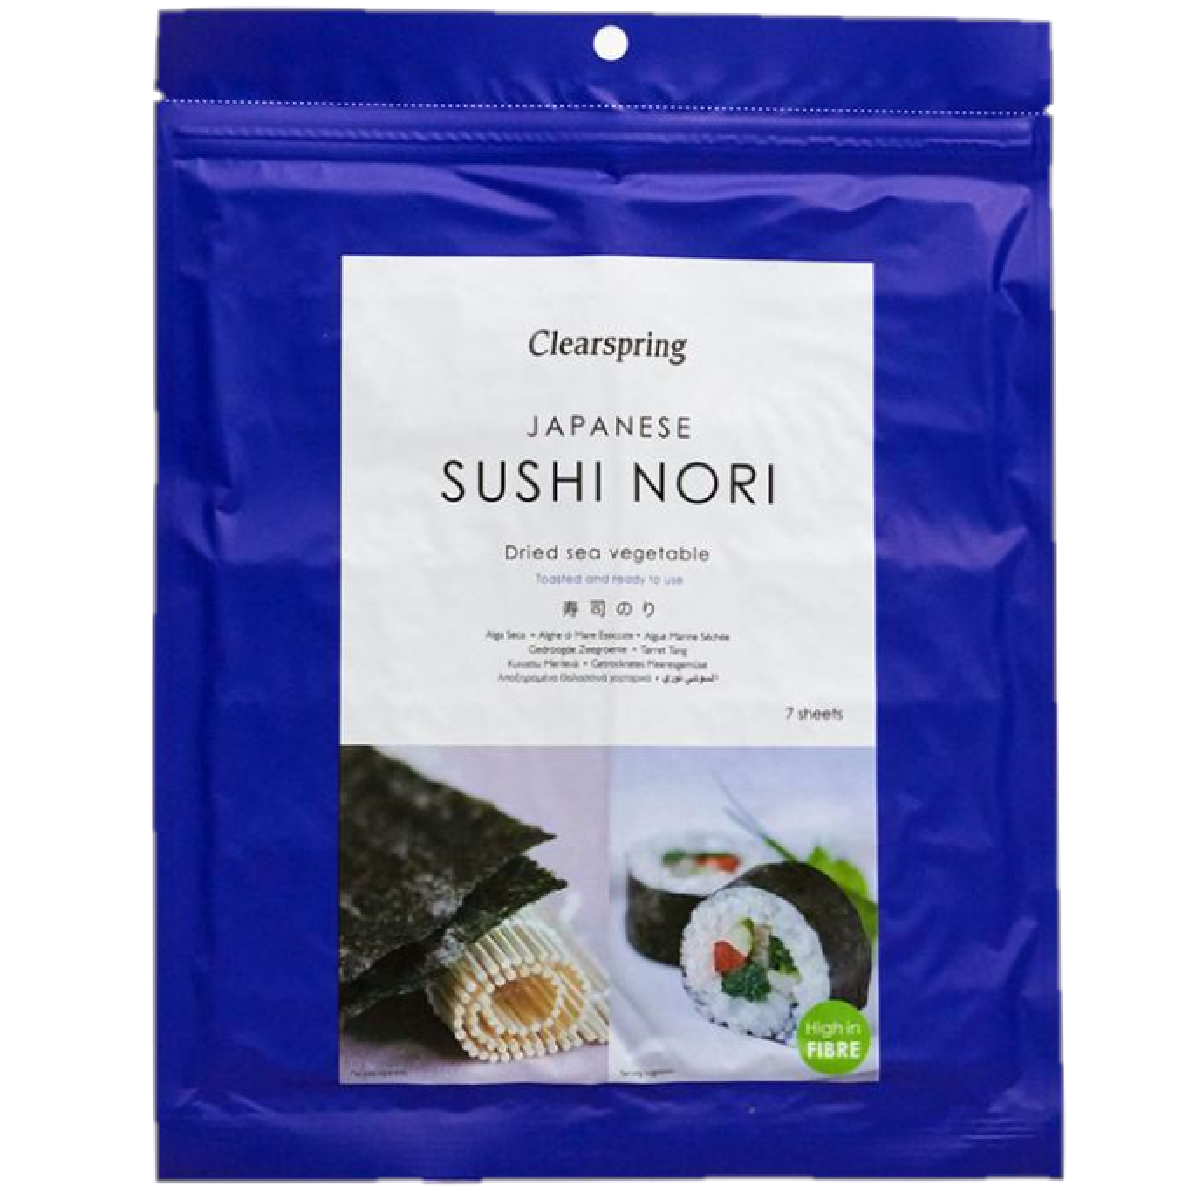 Clearspring Japanese Sushi Nori Dried Sea Vegetable Toasted 17g